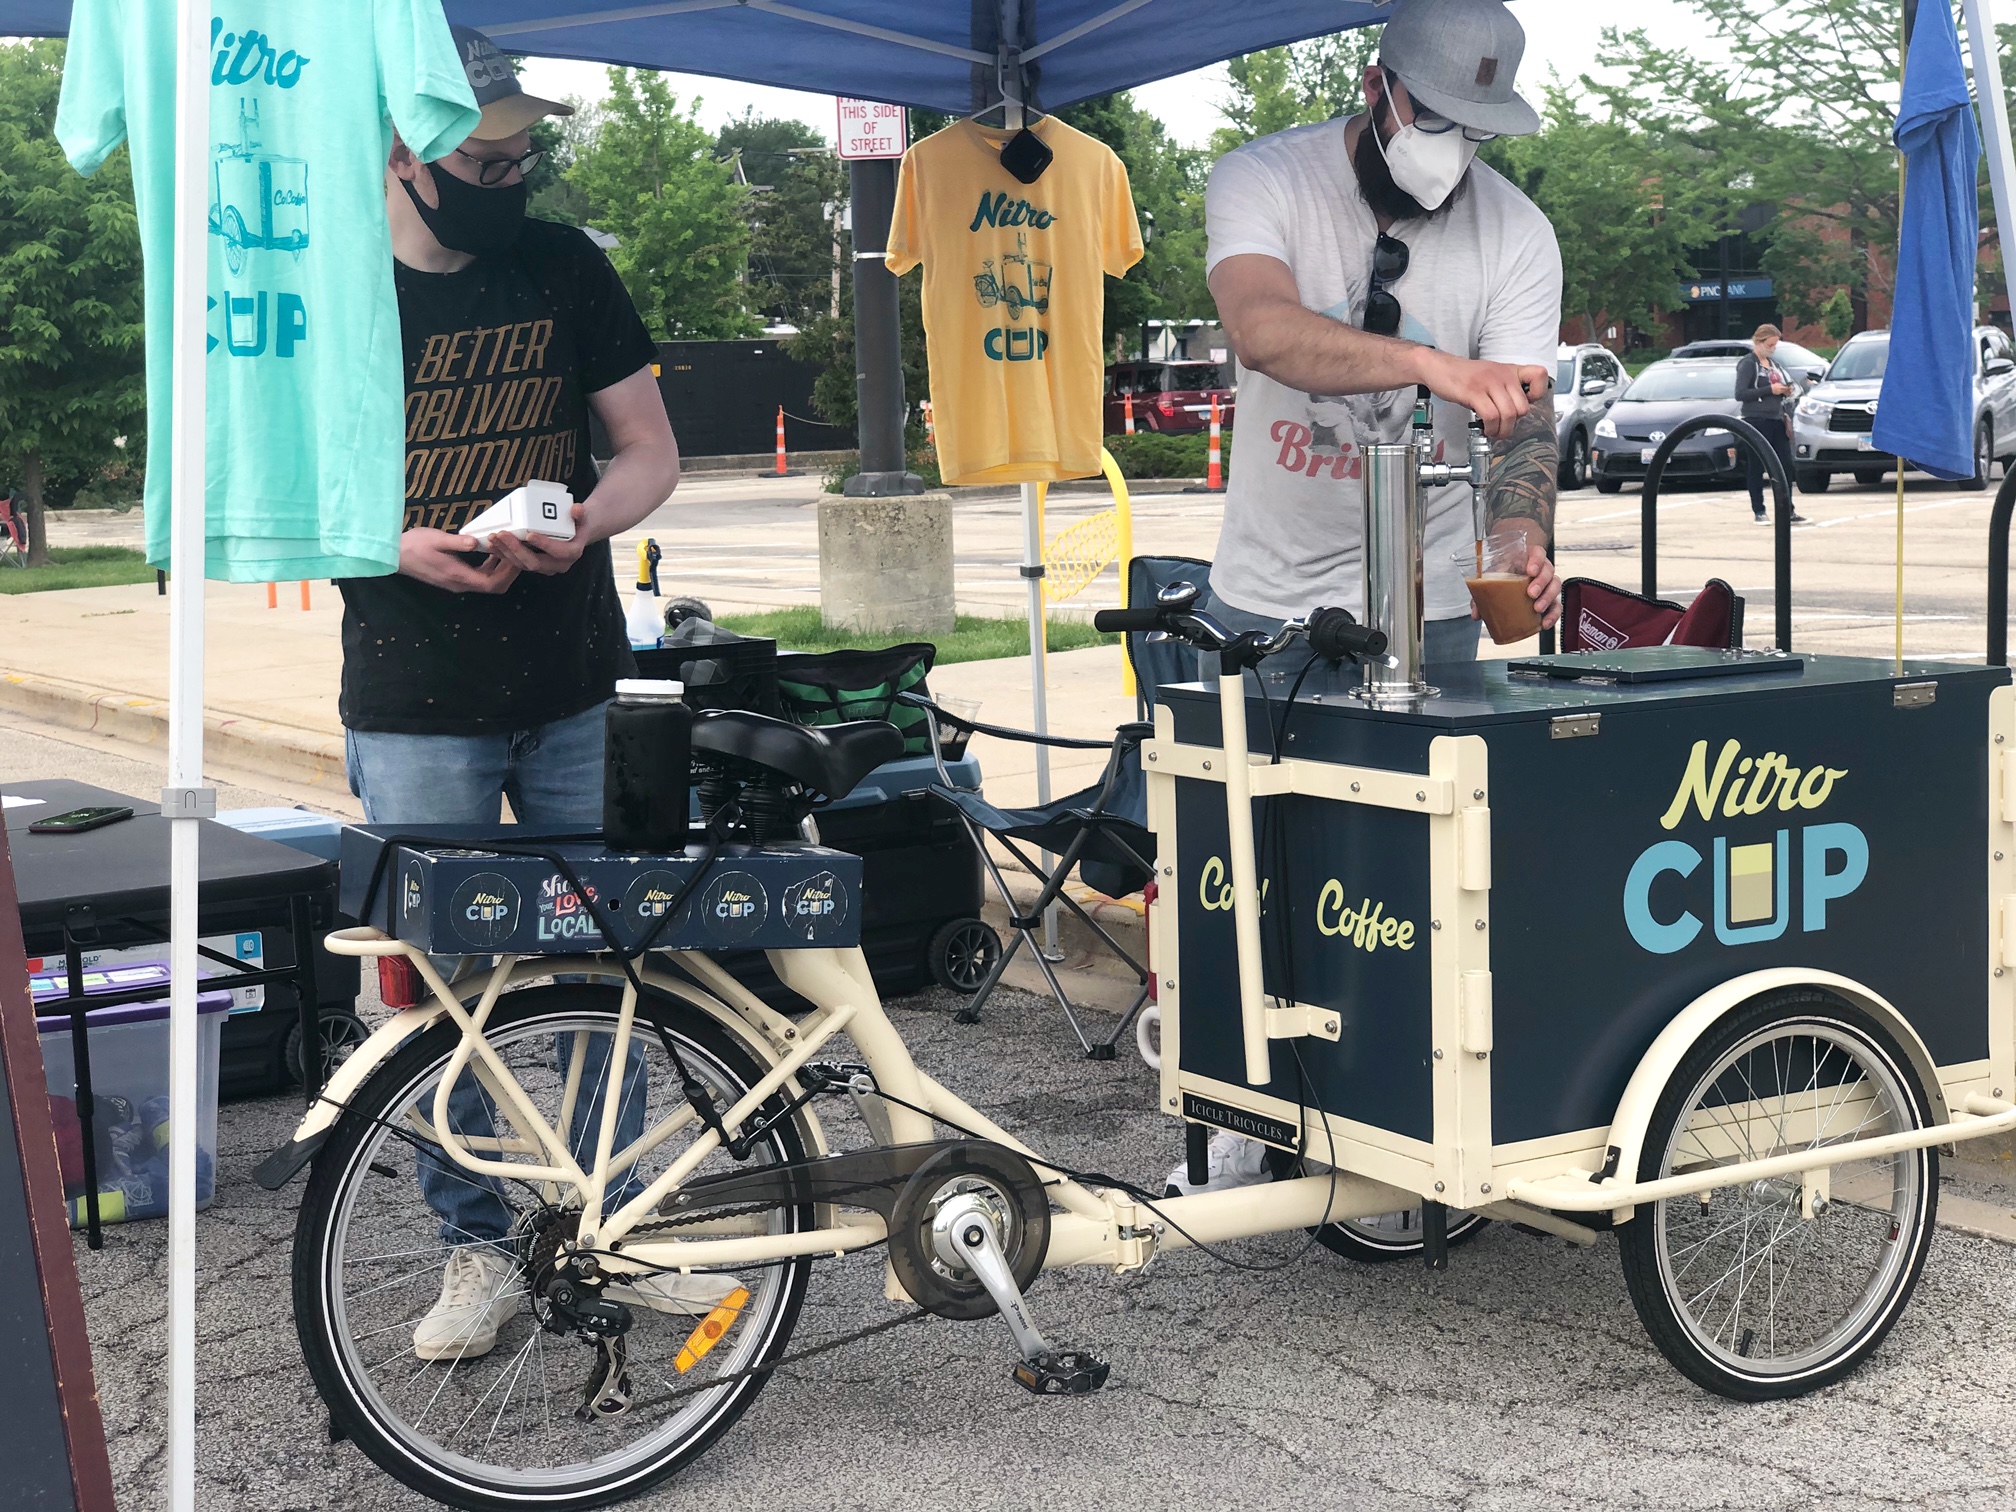 On a bicycle, there is a rectangular cooler for cold brew by Nitro Cup. Photo by Alyssa Buckley.